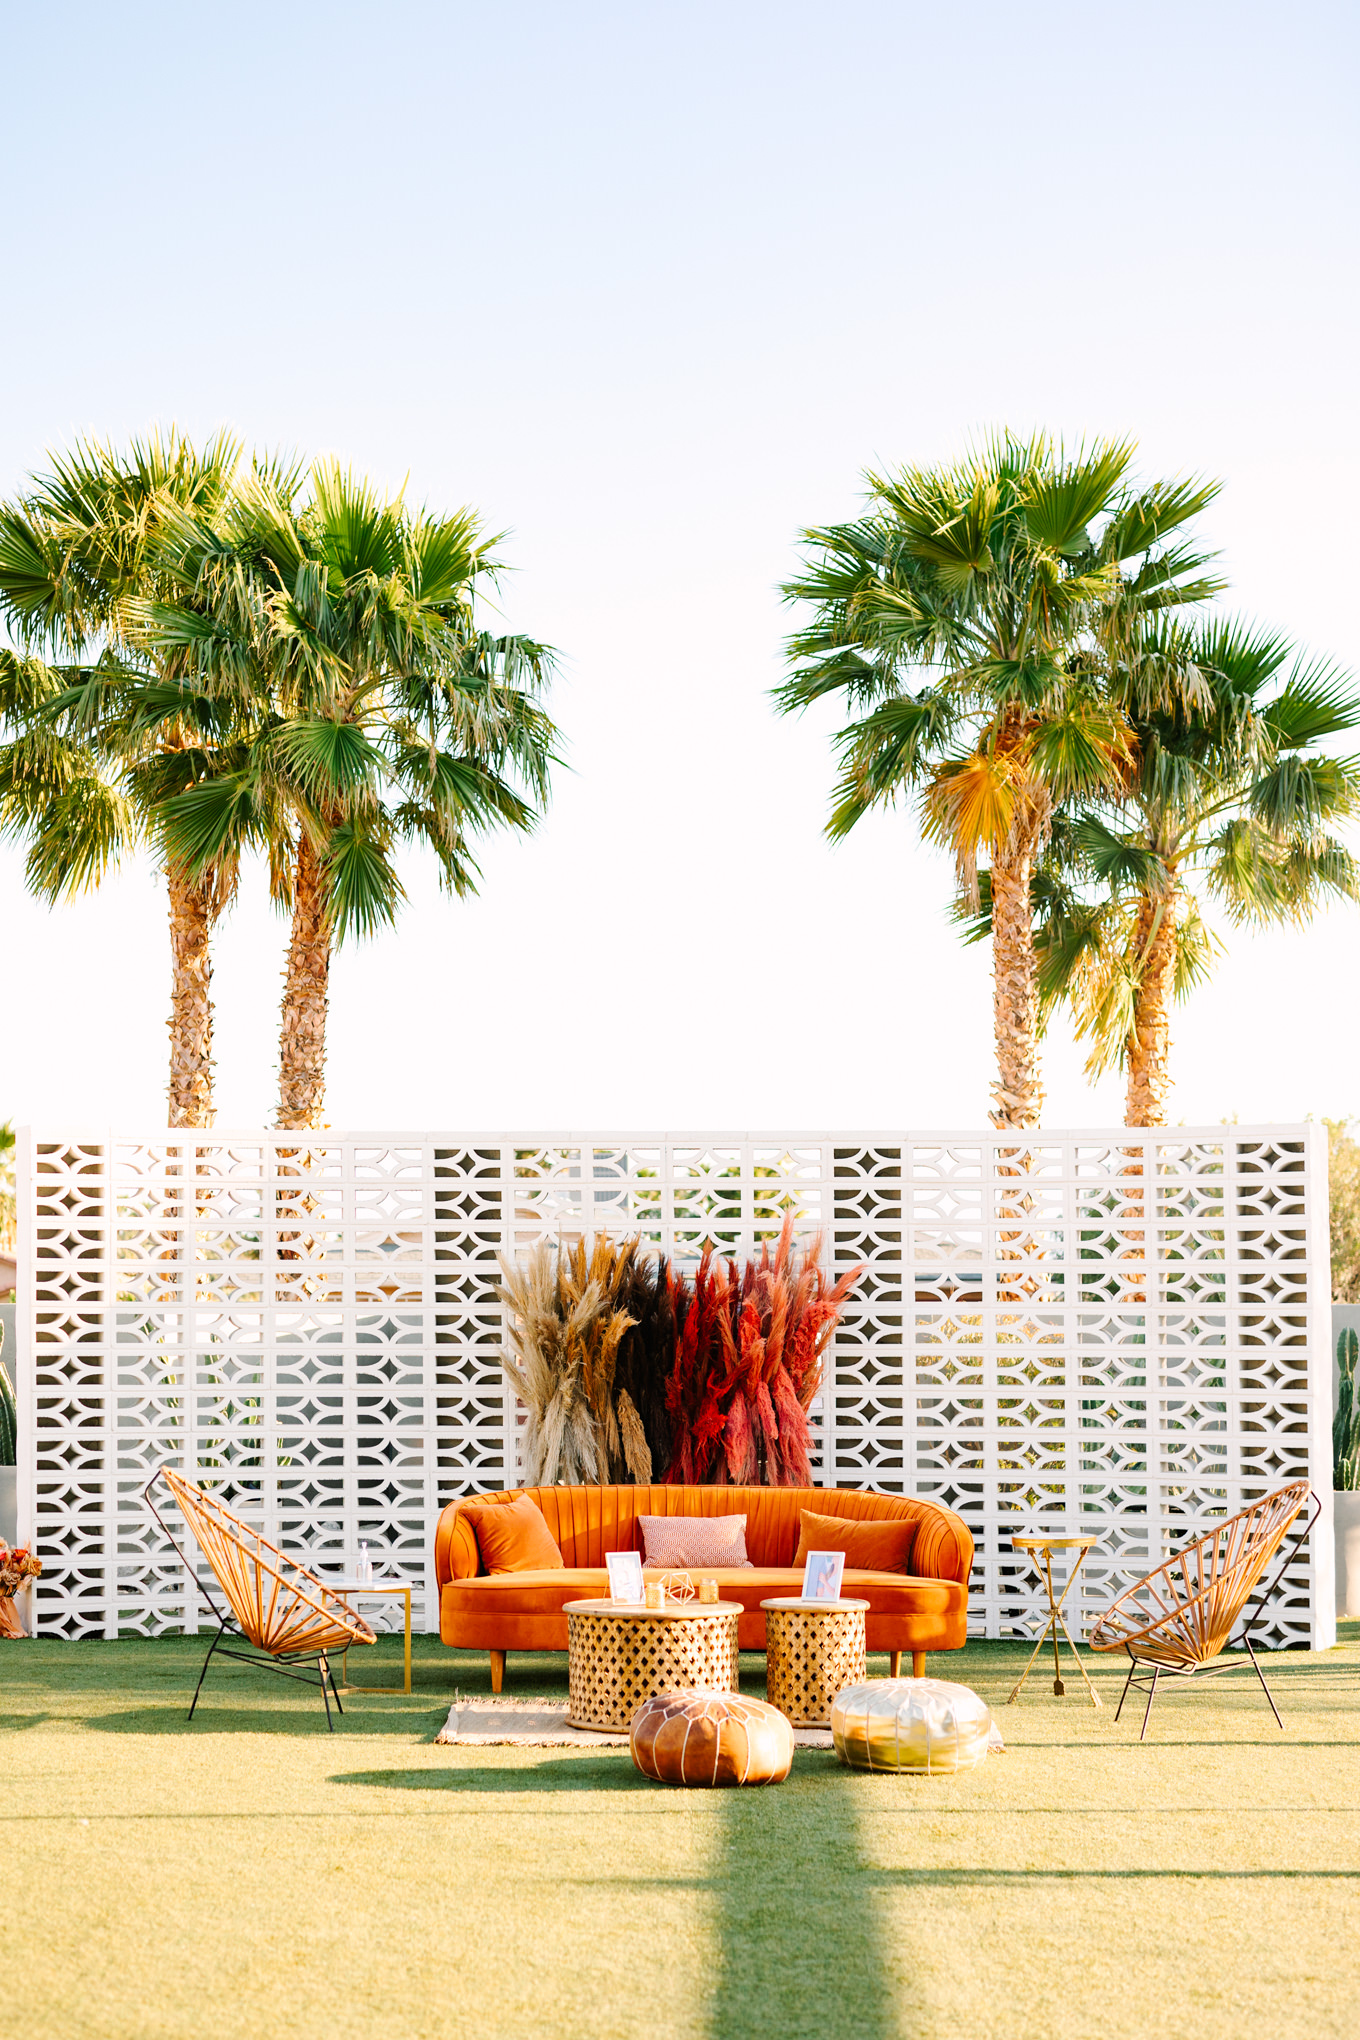 Beautiful lounge setup at Lautner Compound | Pink and orange Lautner Compound wedding | Colorful Palm Springs wedding photography | #palmspringsphotographer #palmspringswedding #lautnercompound #southerncaliforniawedding  Source: Mary Costa Photography | Los Angeles